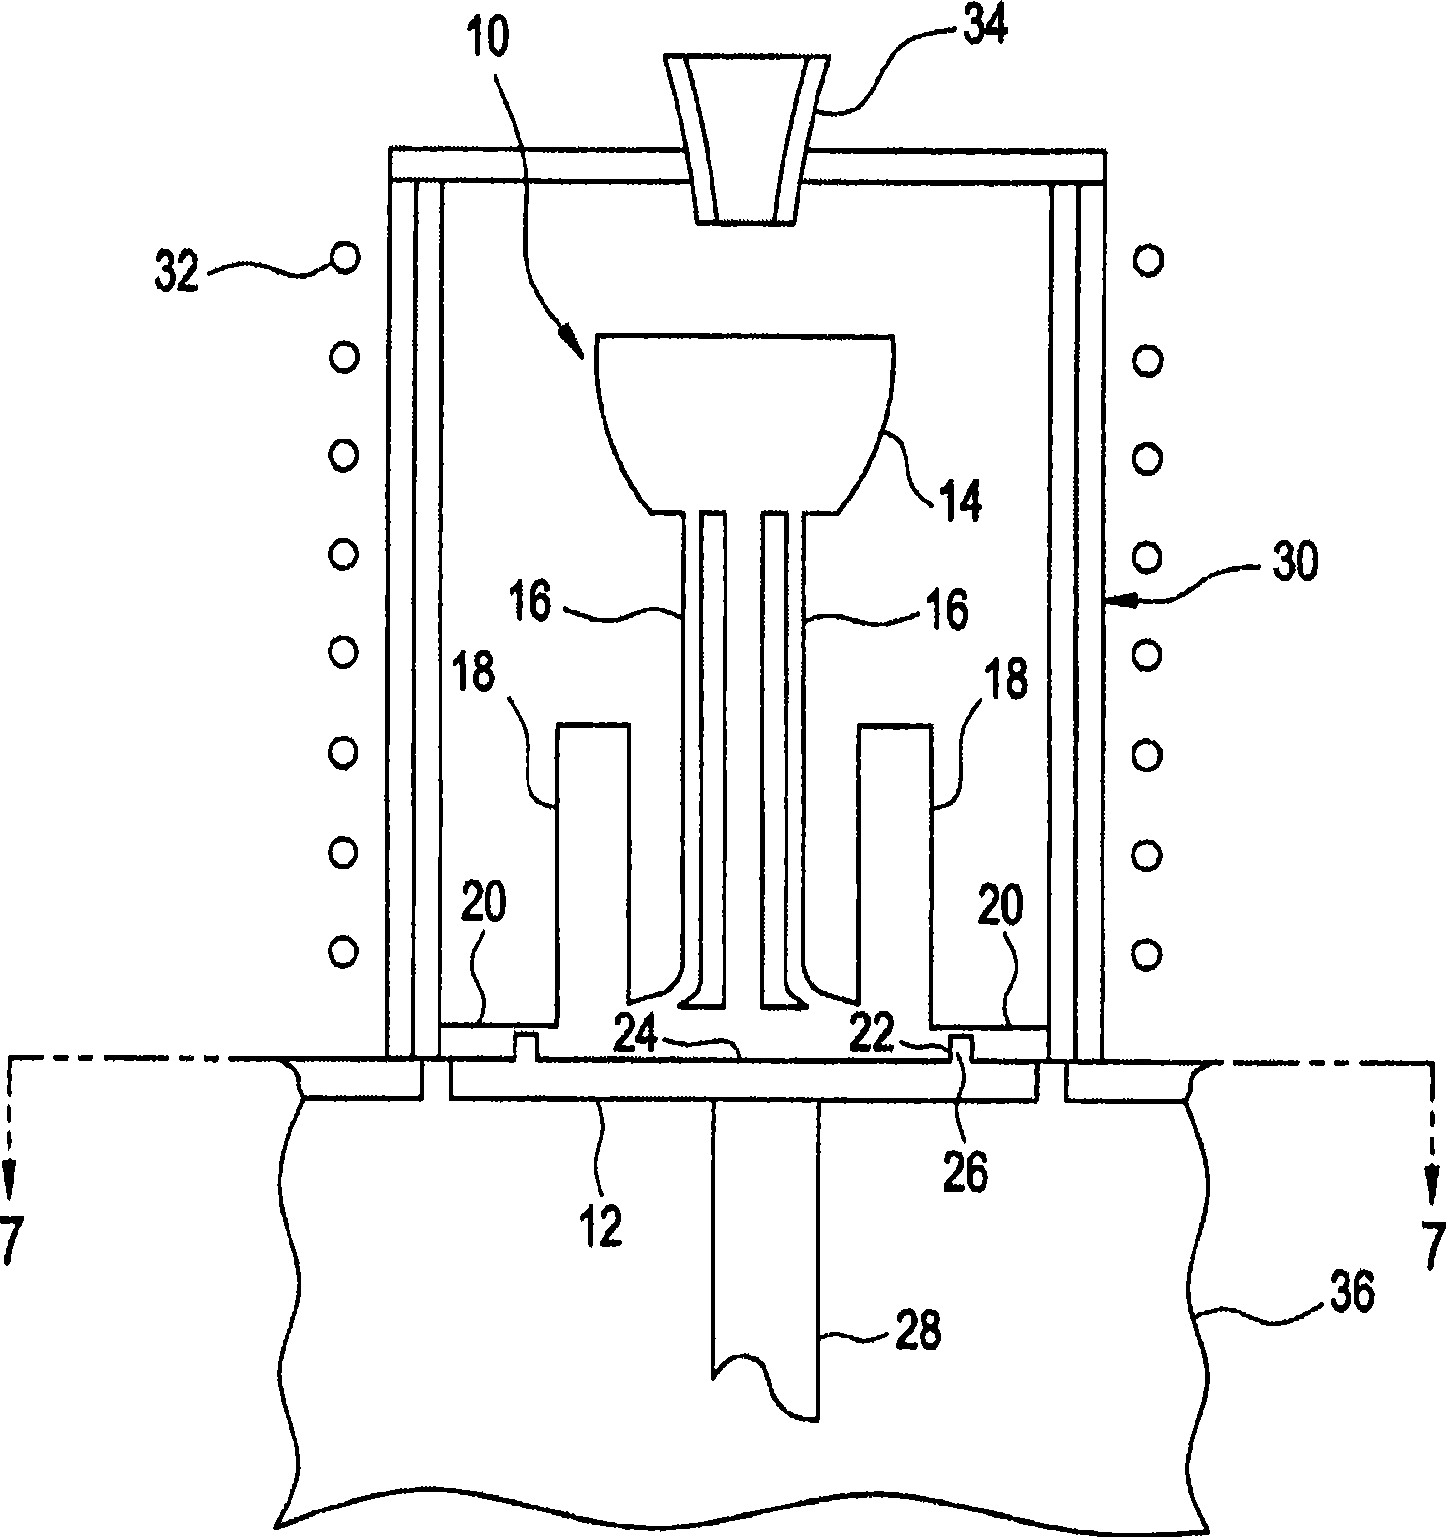 Liquid metal directional casting apparatus and process